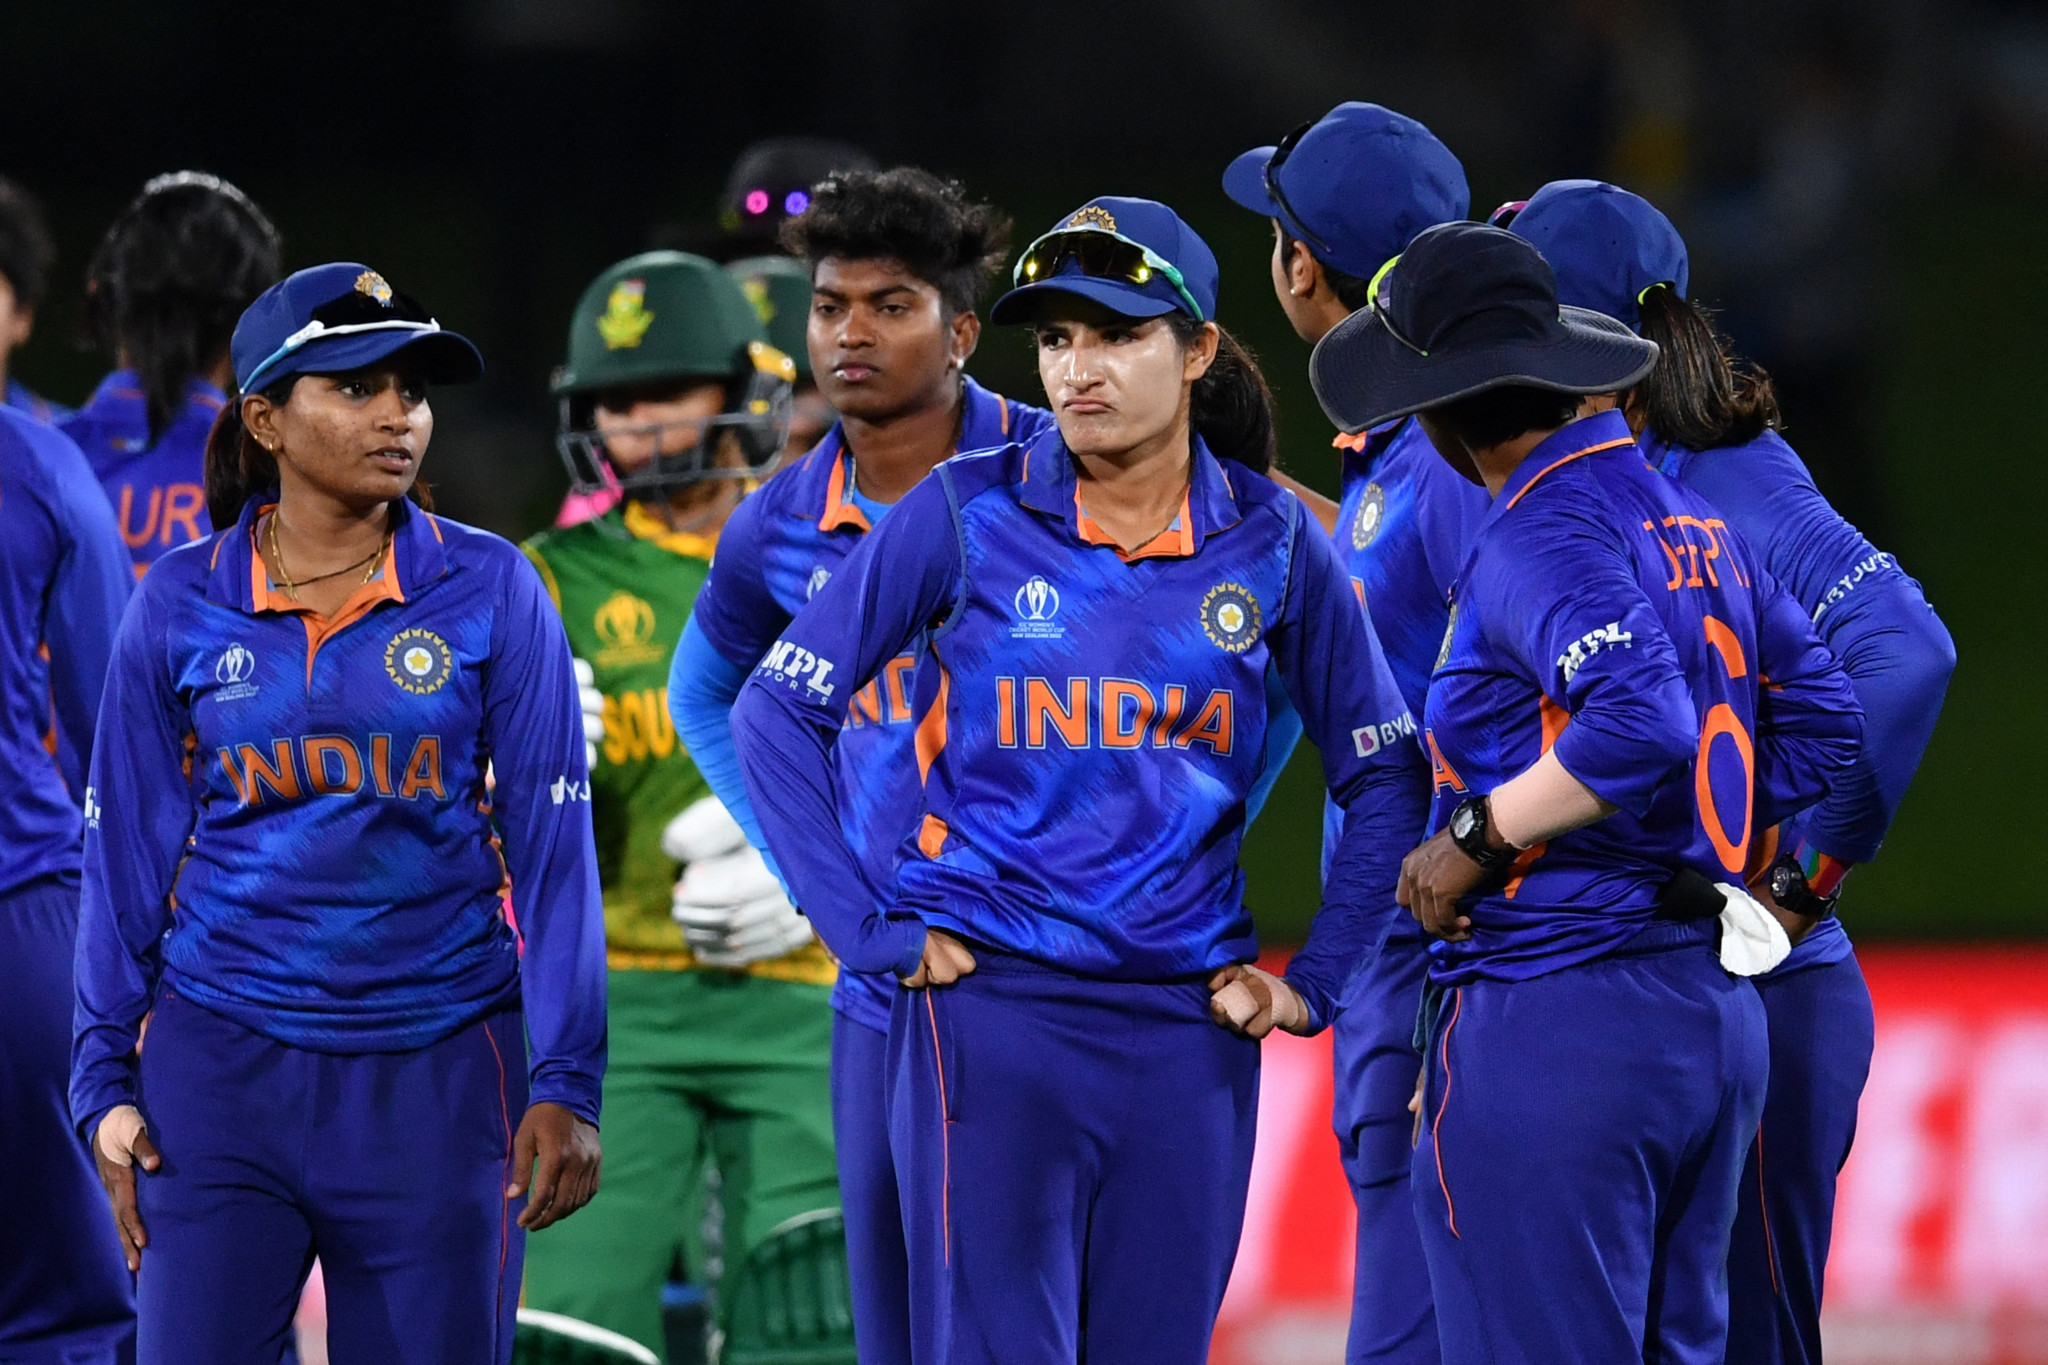 India were eliminated from the Women's Cricket World Cup after a final ball defeat to South Africa ©Getty Images